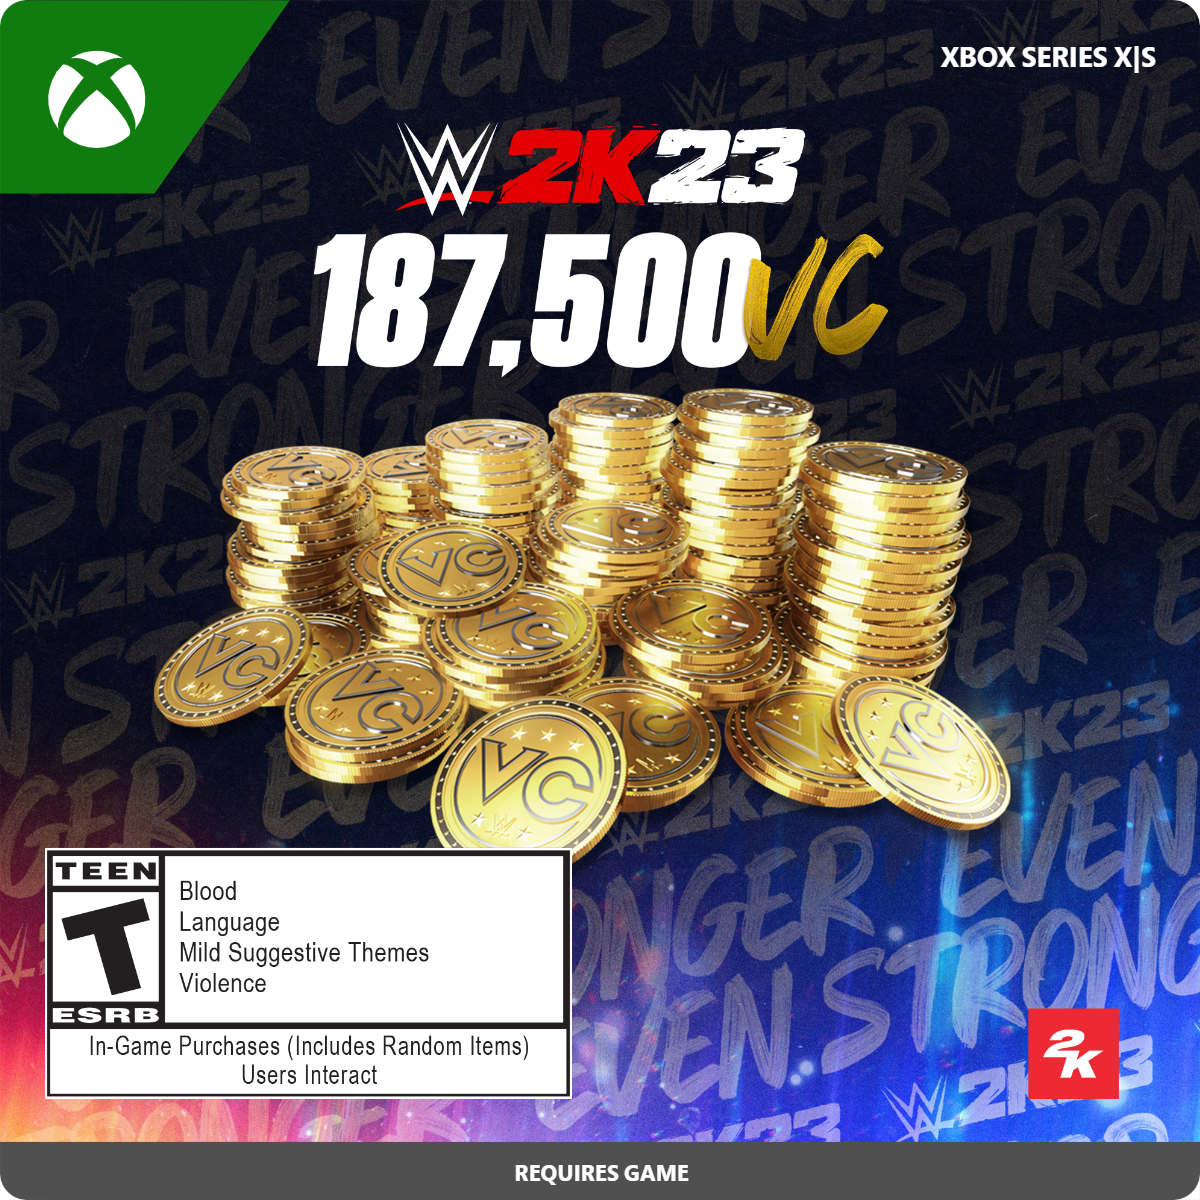 WWE 2K23: Virtual Currency Pack - Xbox Series X/S 187,500